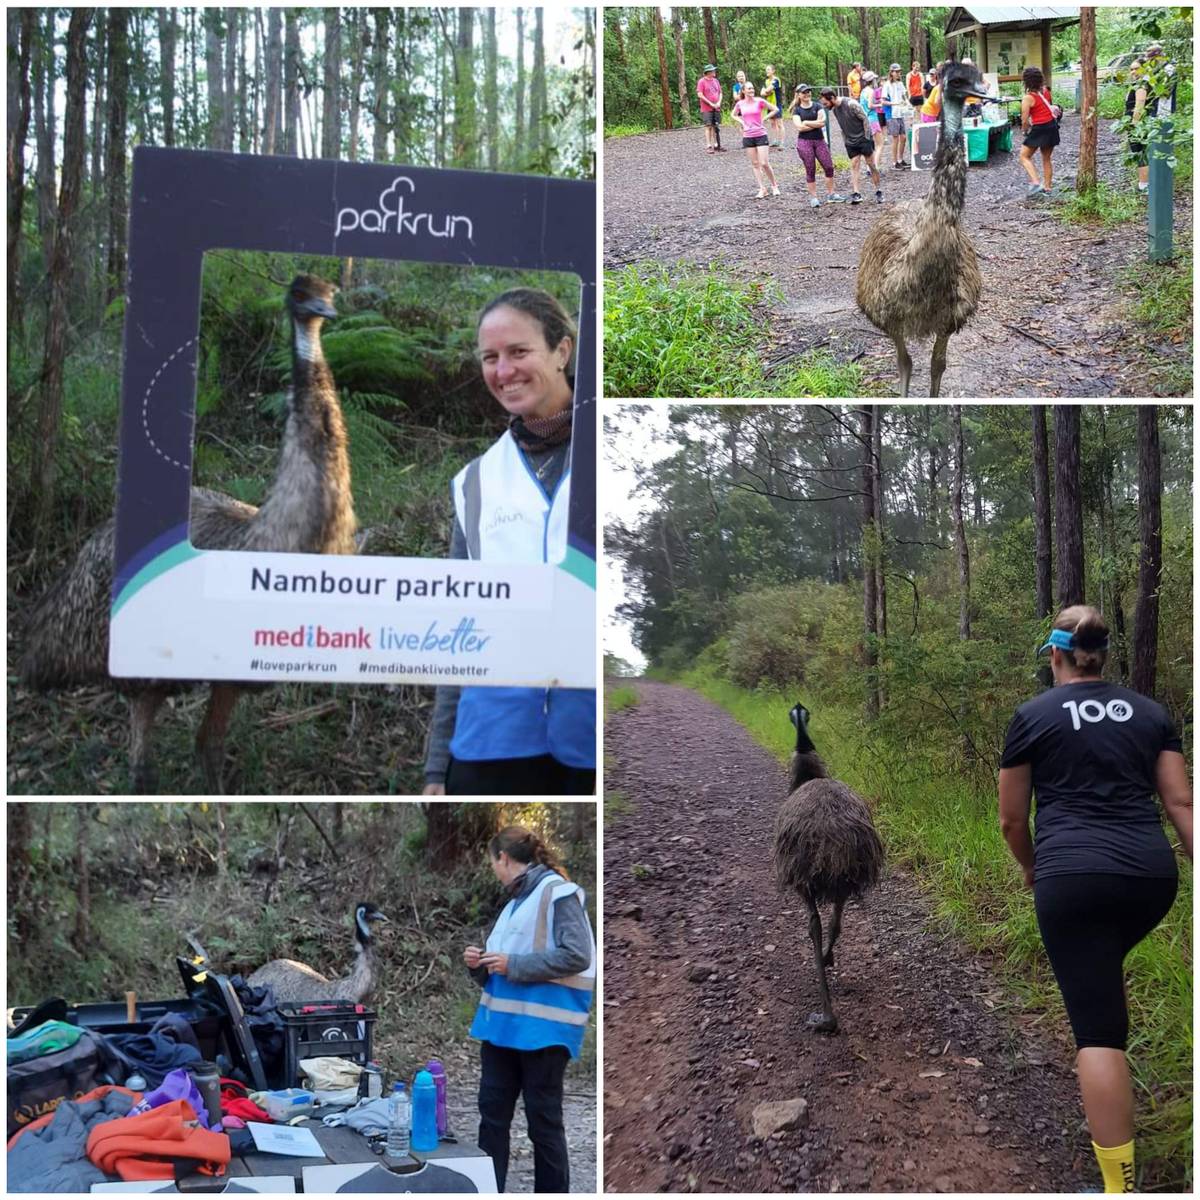 In Australian parkrun circles Nambour is famous not only as being one of the hardest courses in Australia but also for Fluffy the Emu. (Photo credit on both collages - above and below - goes to Nambour parkrun volunteer photographers).